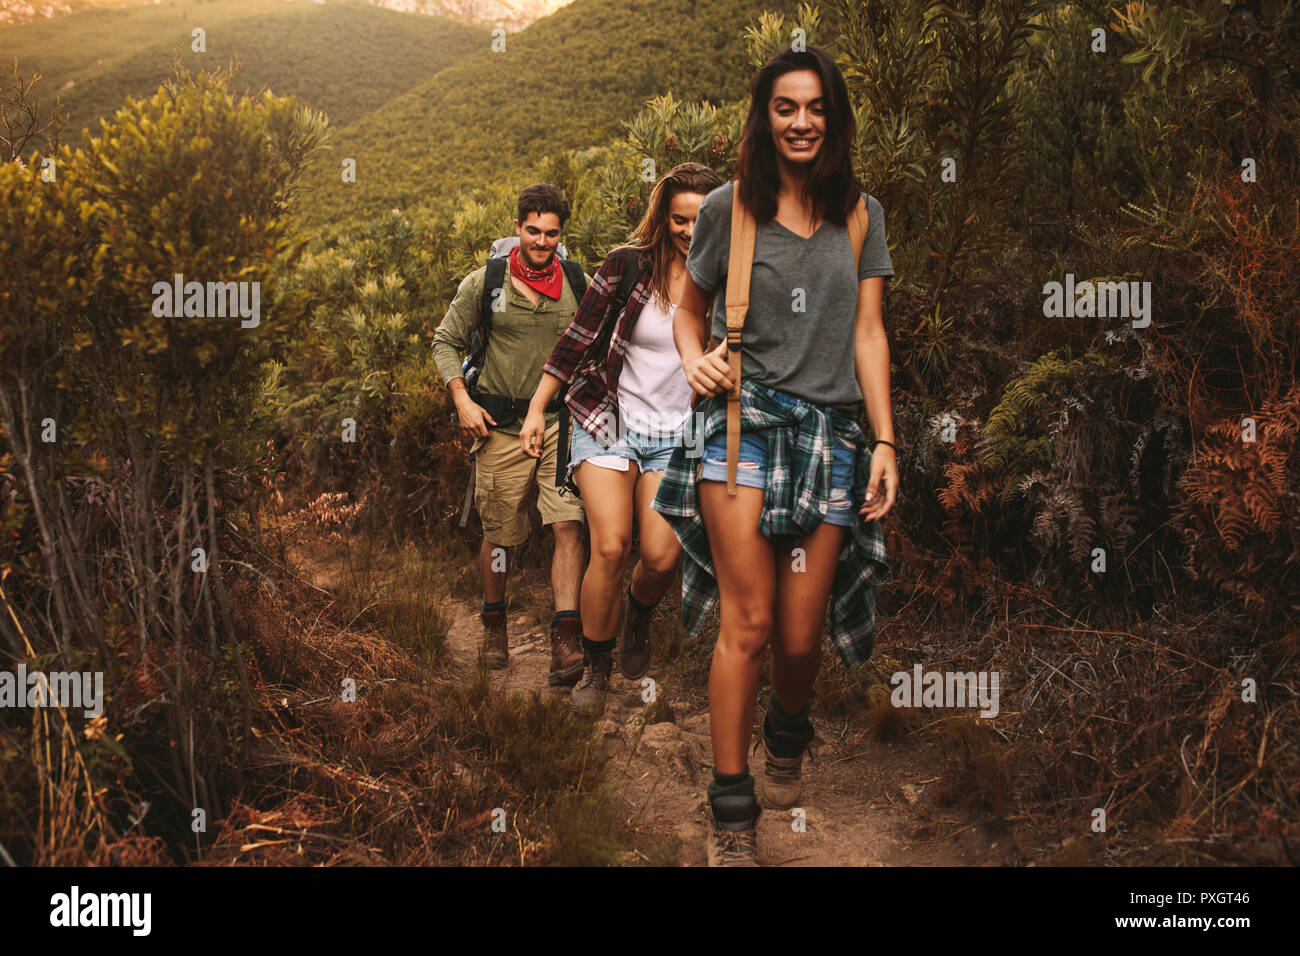 Friends hiking on rugged hilly terrain. Two women with male friend walking on a rocky path on a mountain. Stock Photo